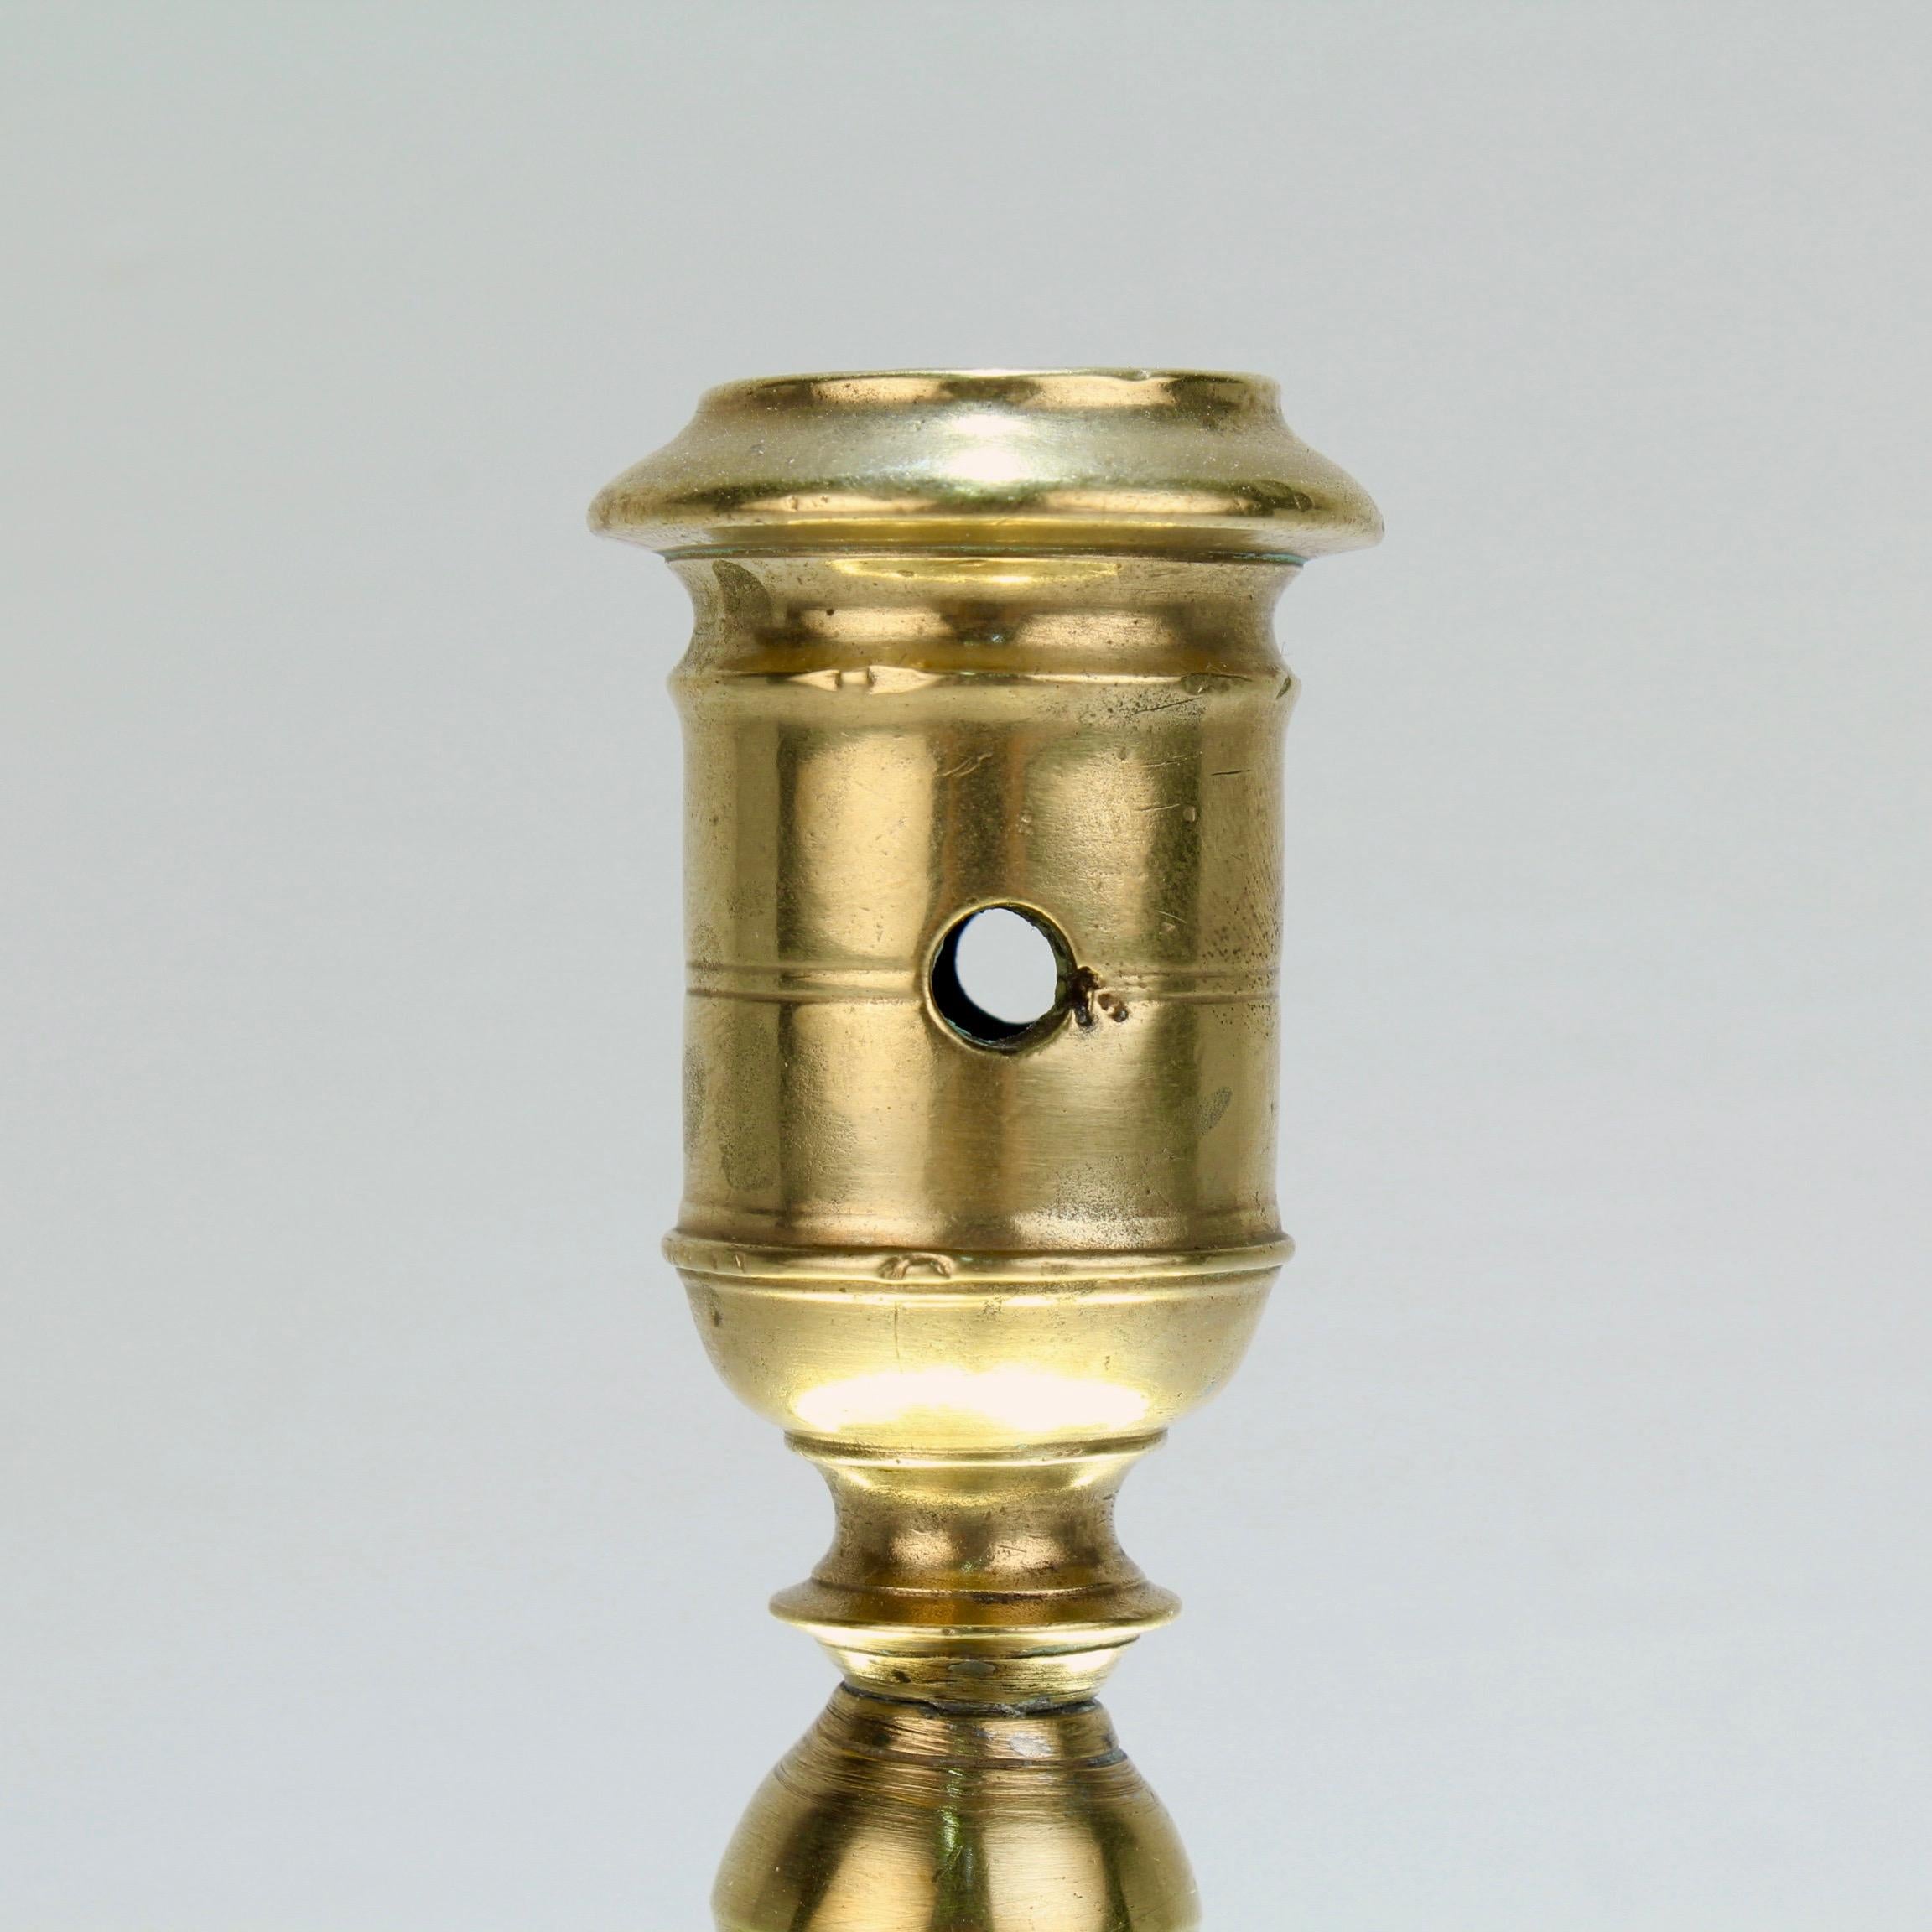 Baroque Antique 17th Century Dutch Brass Baluster Candlestick For Sale